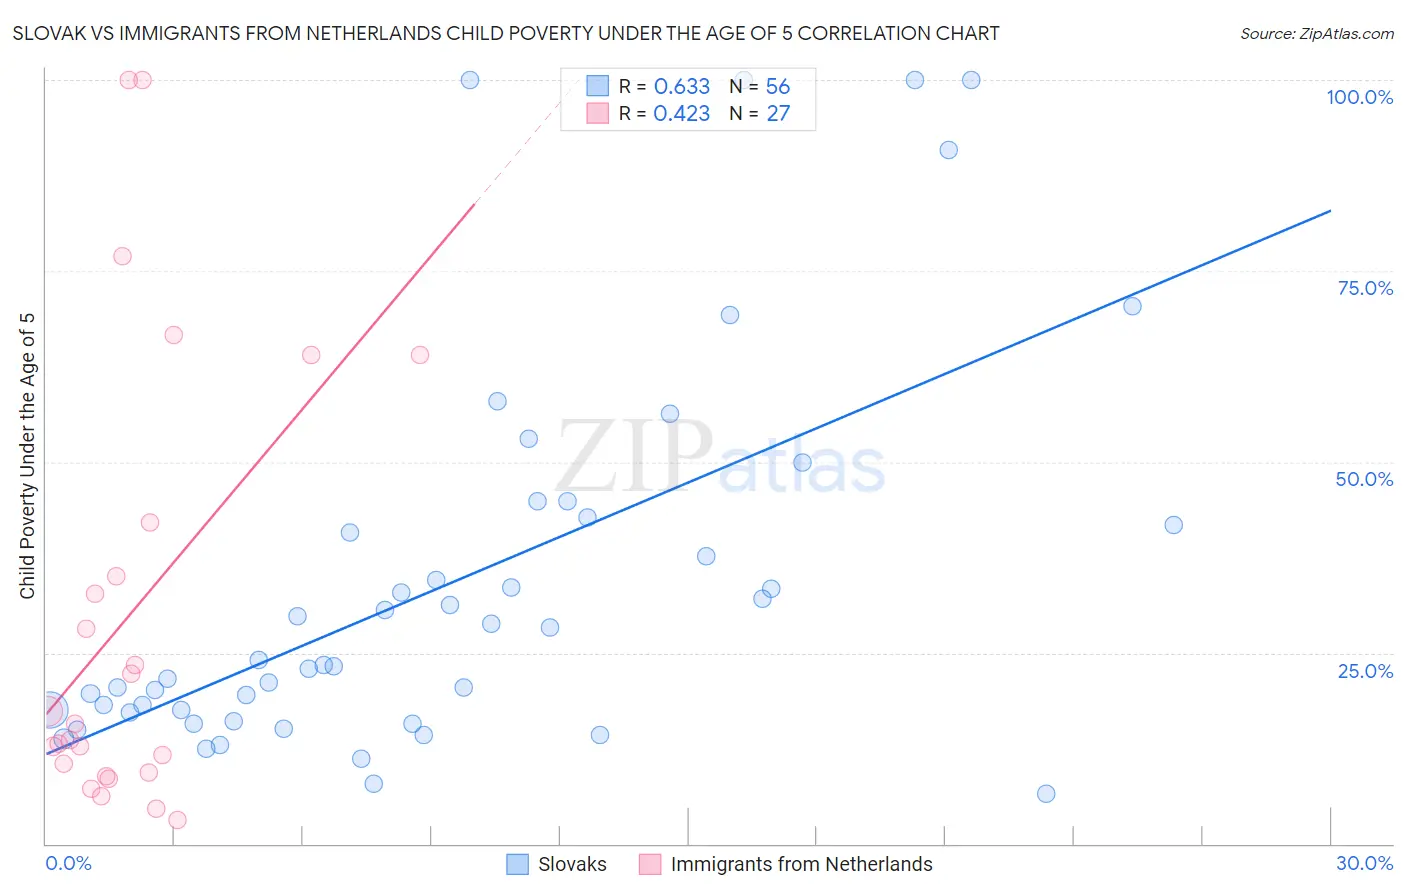 Slovak vs Immigrants from Netherlands Child Poverty Under the Age of 5